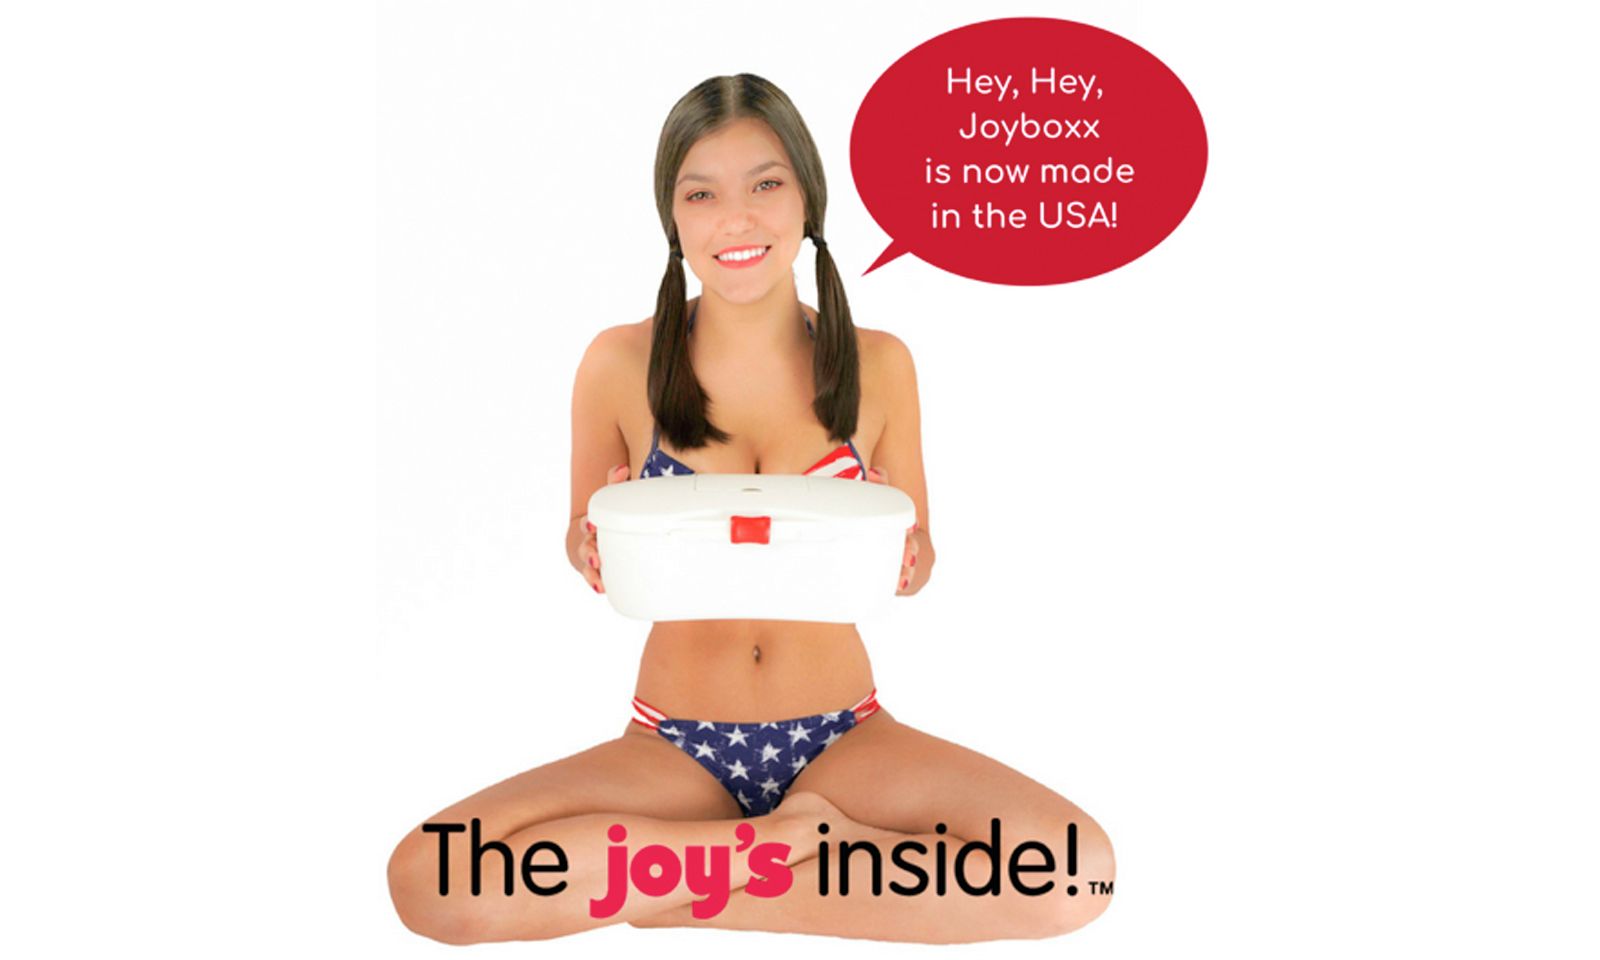 Joyboxx Adult Toy Boxes Now Made in U.S.